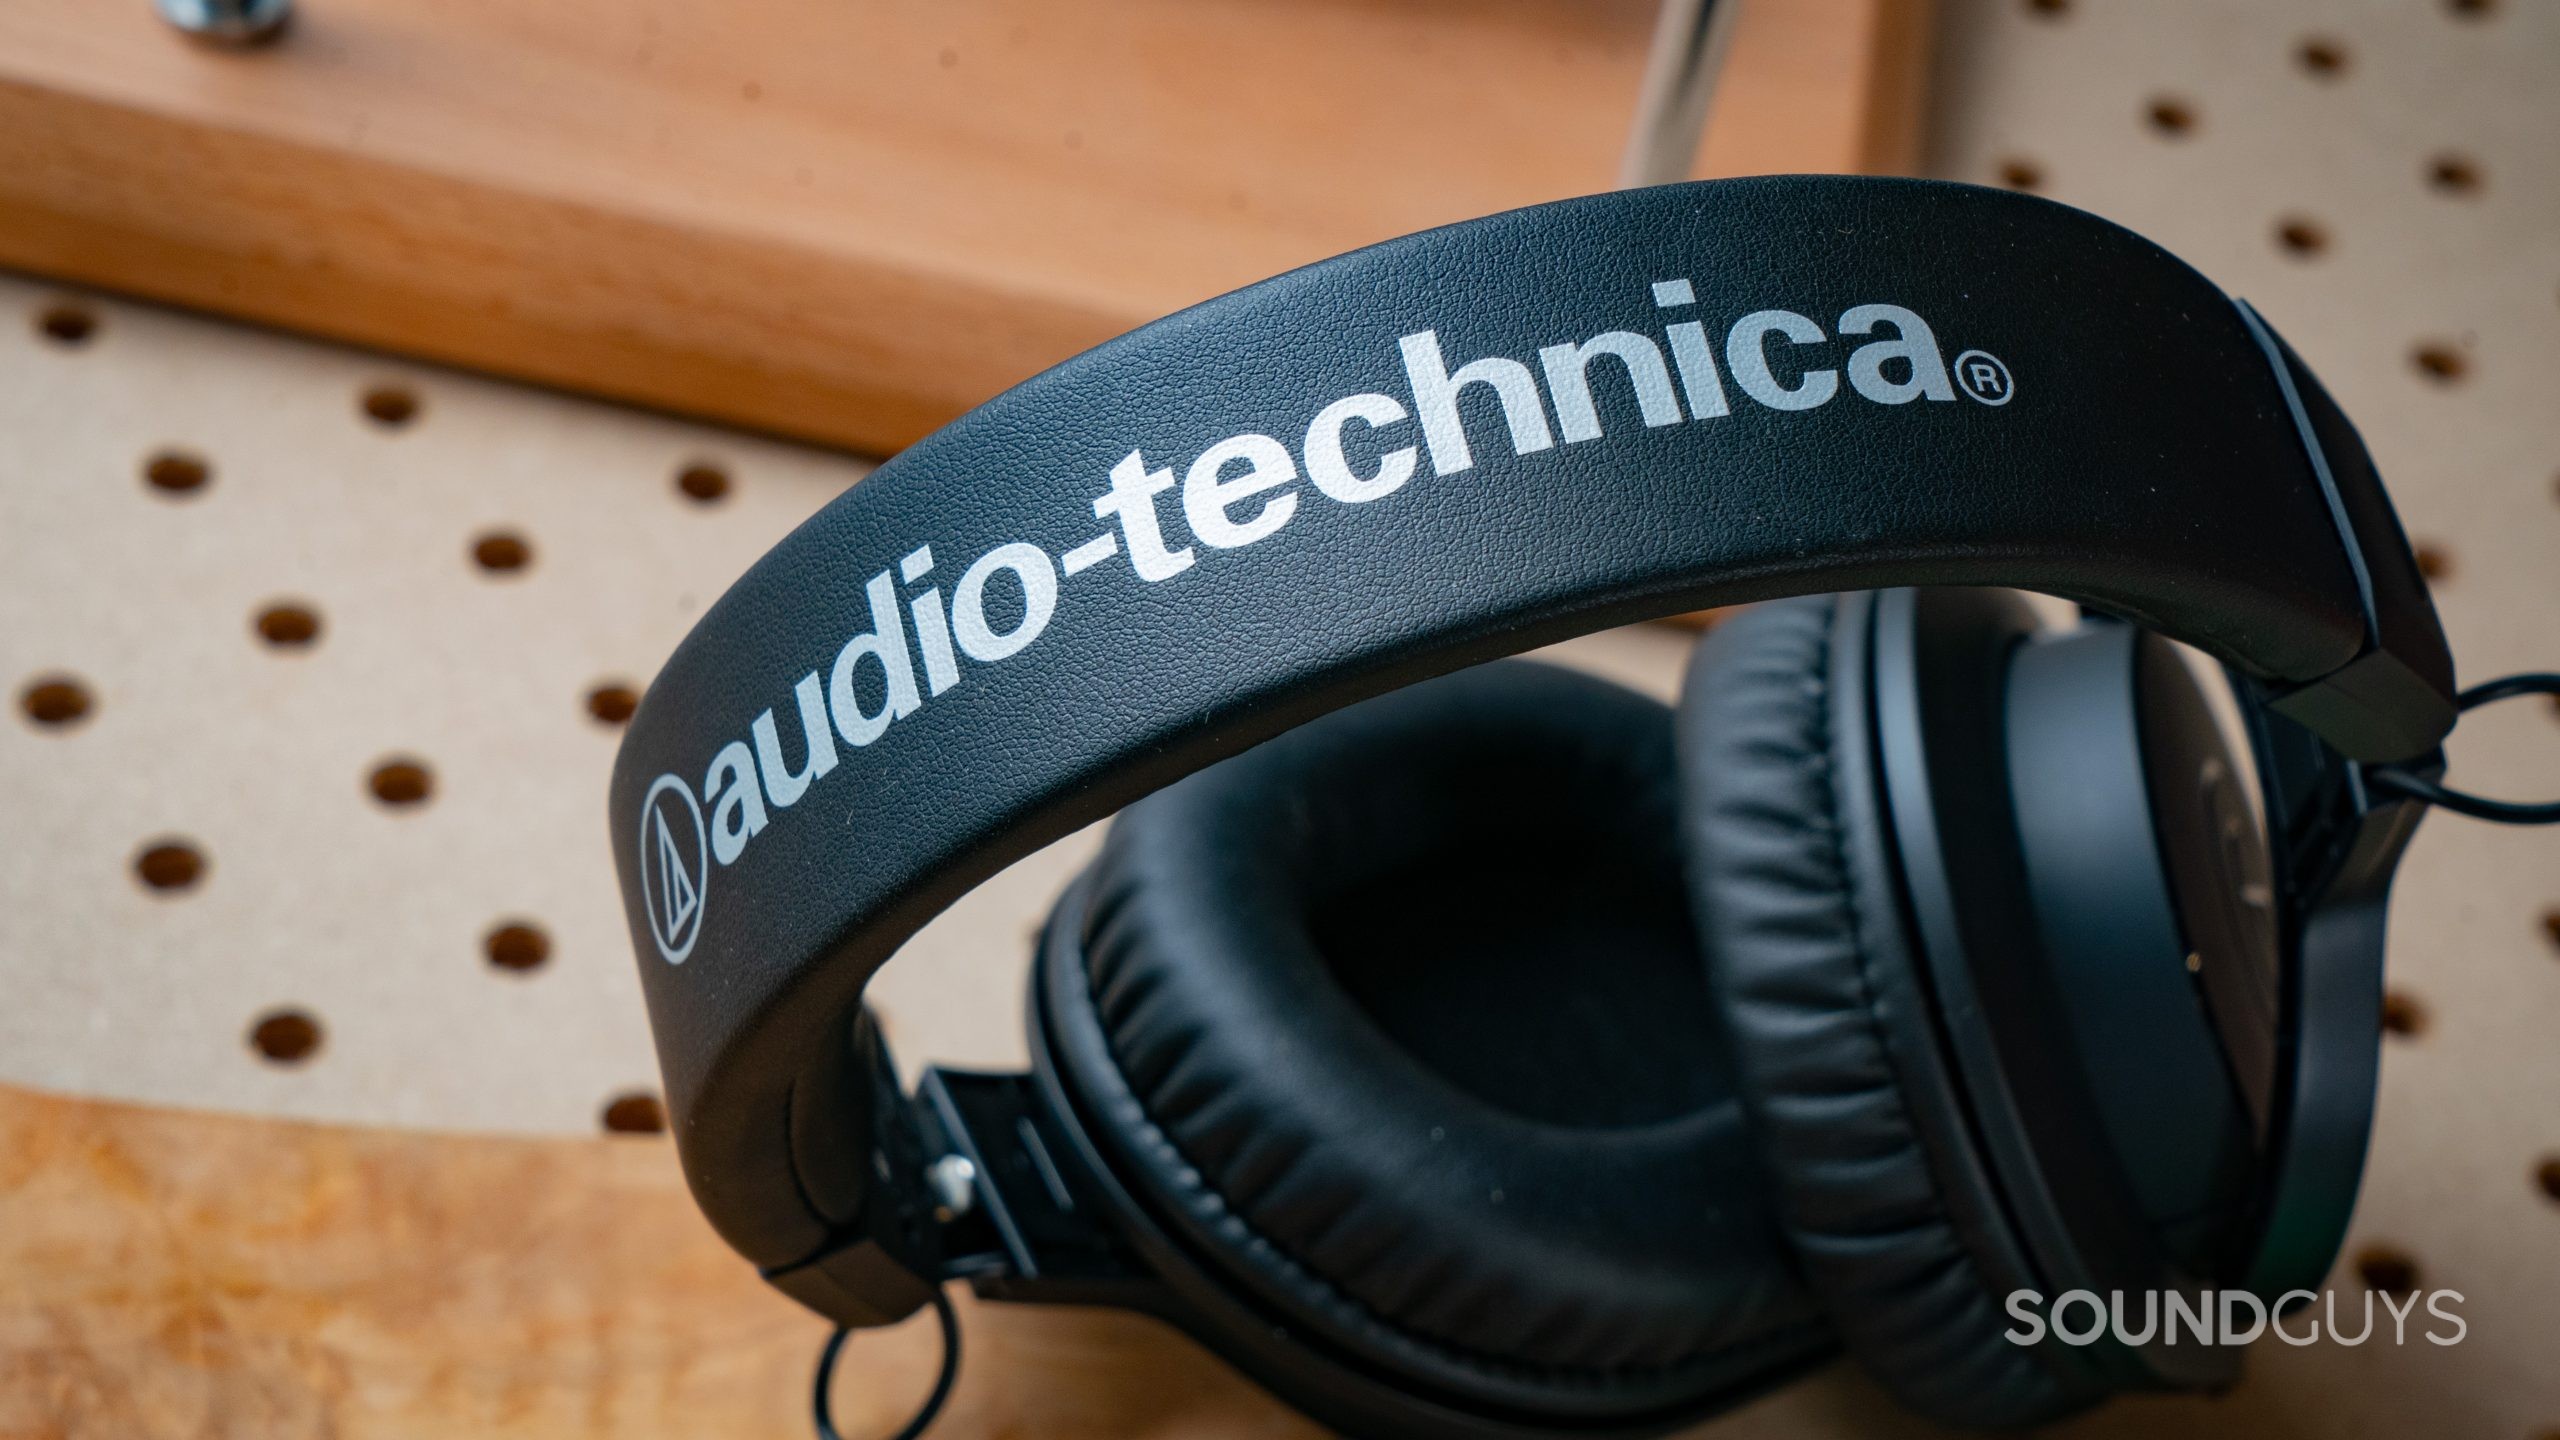 Image showing the top side of a Audio-Technica ATH-M20xBT headset